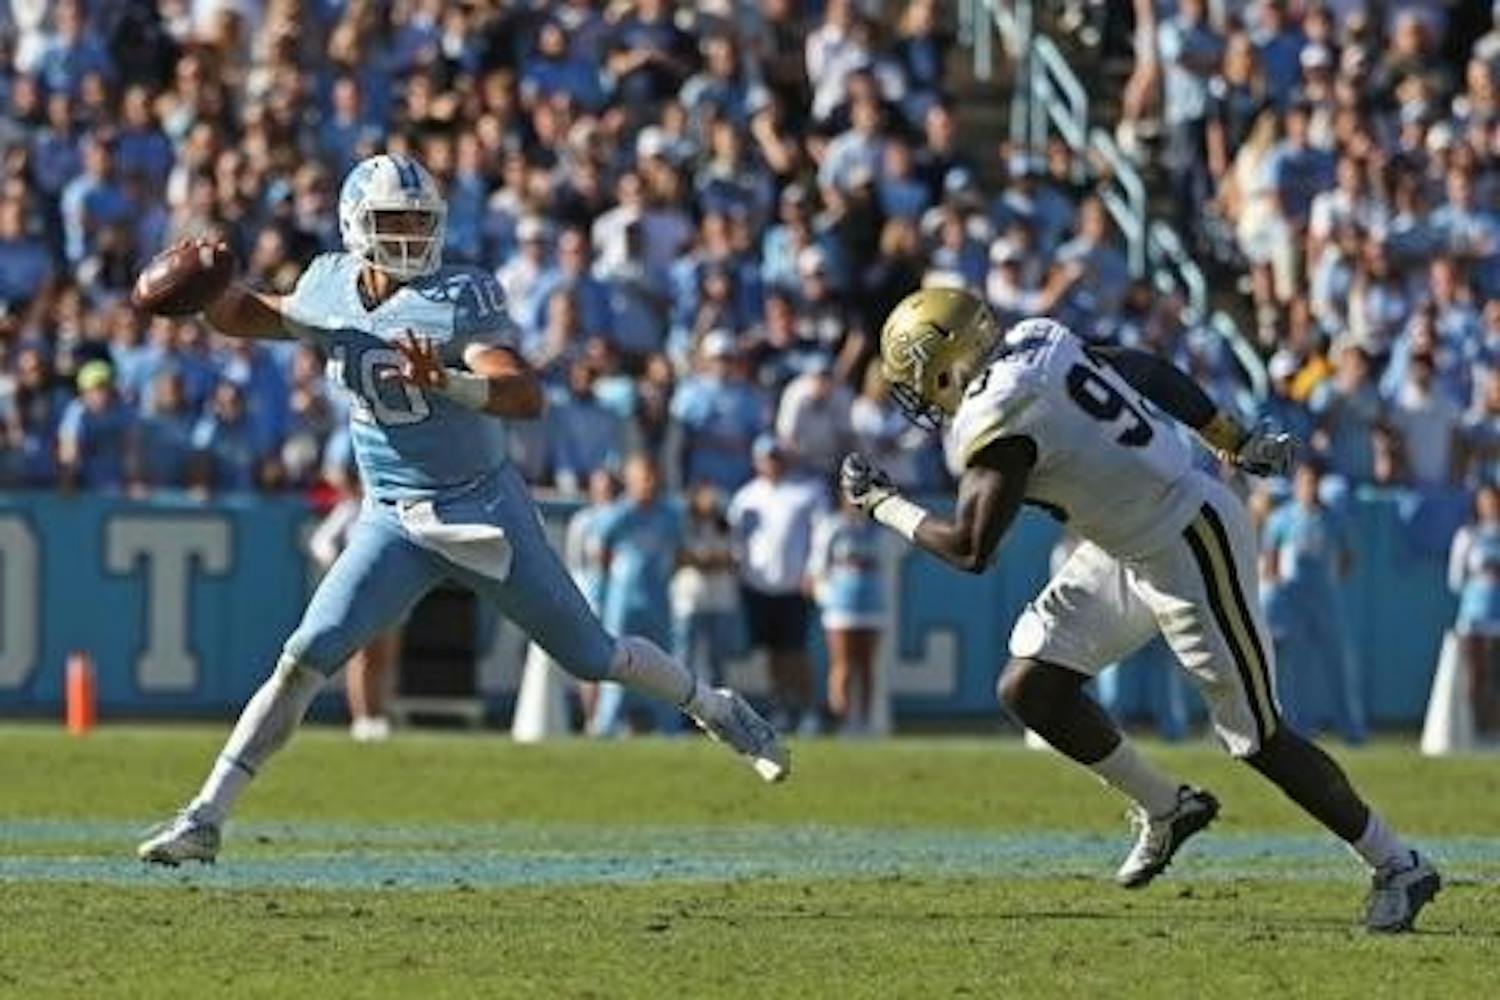 UNC quarterback Mitch Trubisky (10) attempts a pass under pressure&nbsp;in a 48-20 win over Georgia Tech on Nov. 5. Trubisky will forgo his senior season and&nbsp;enter the 2017 NFL Draft.